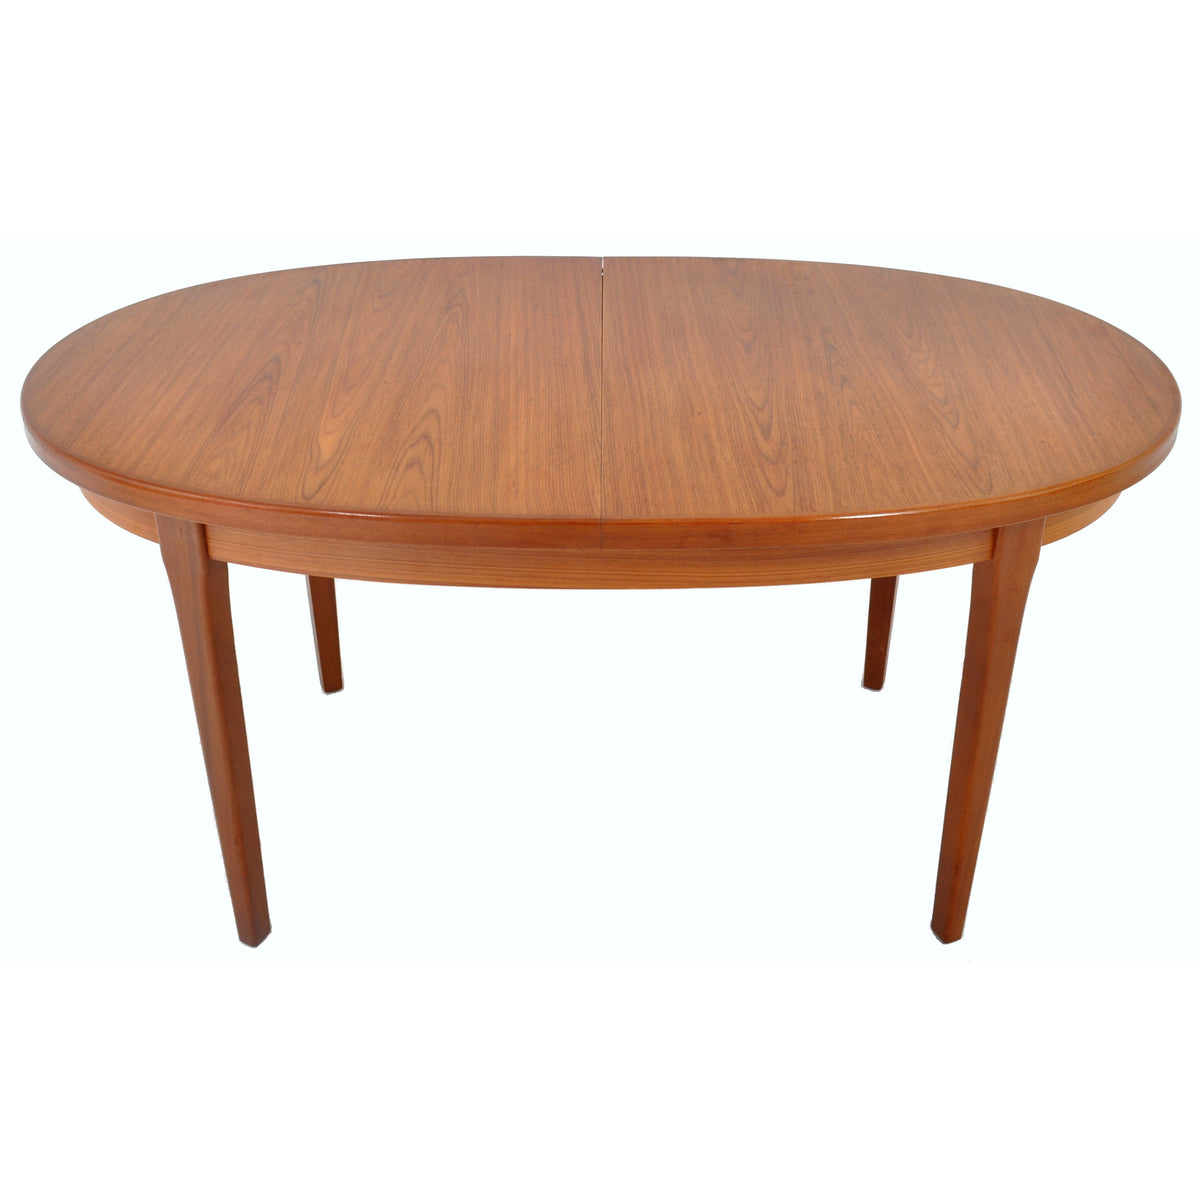 Mid-Century Modern Danish Style Teak Dining Table with Butterfly Leaf by G Plan, 1960s